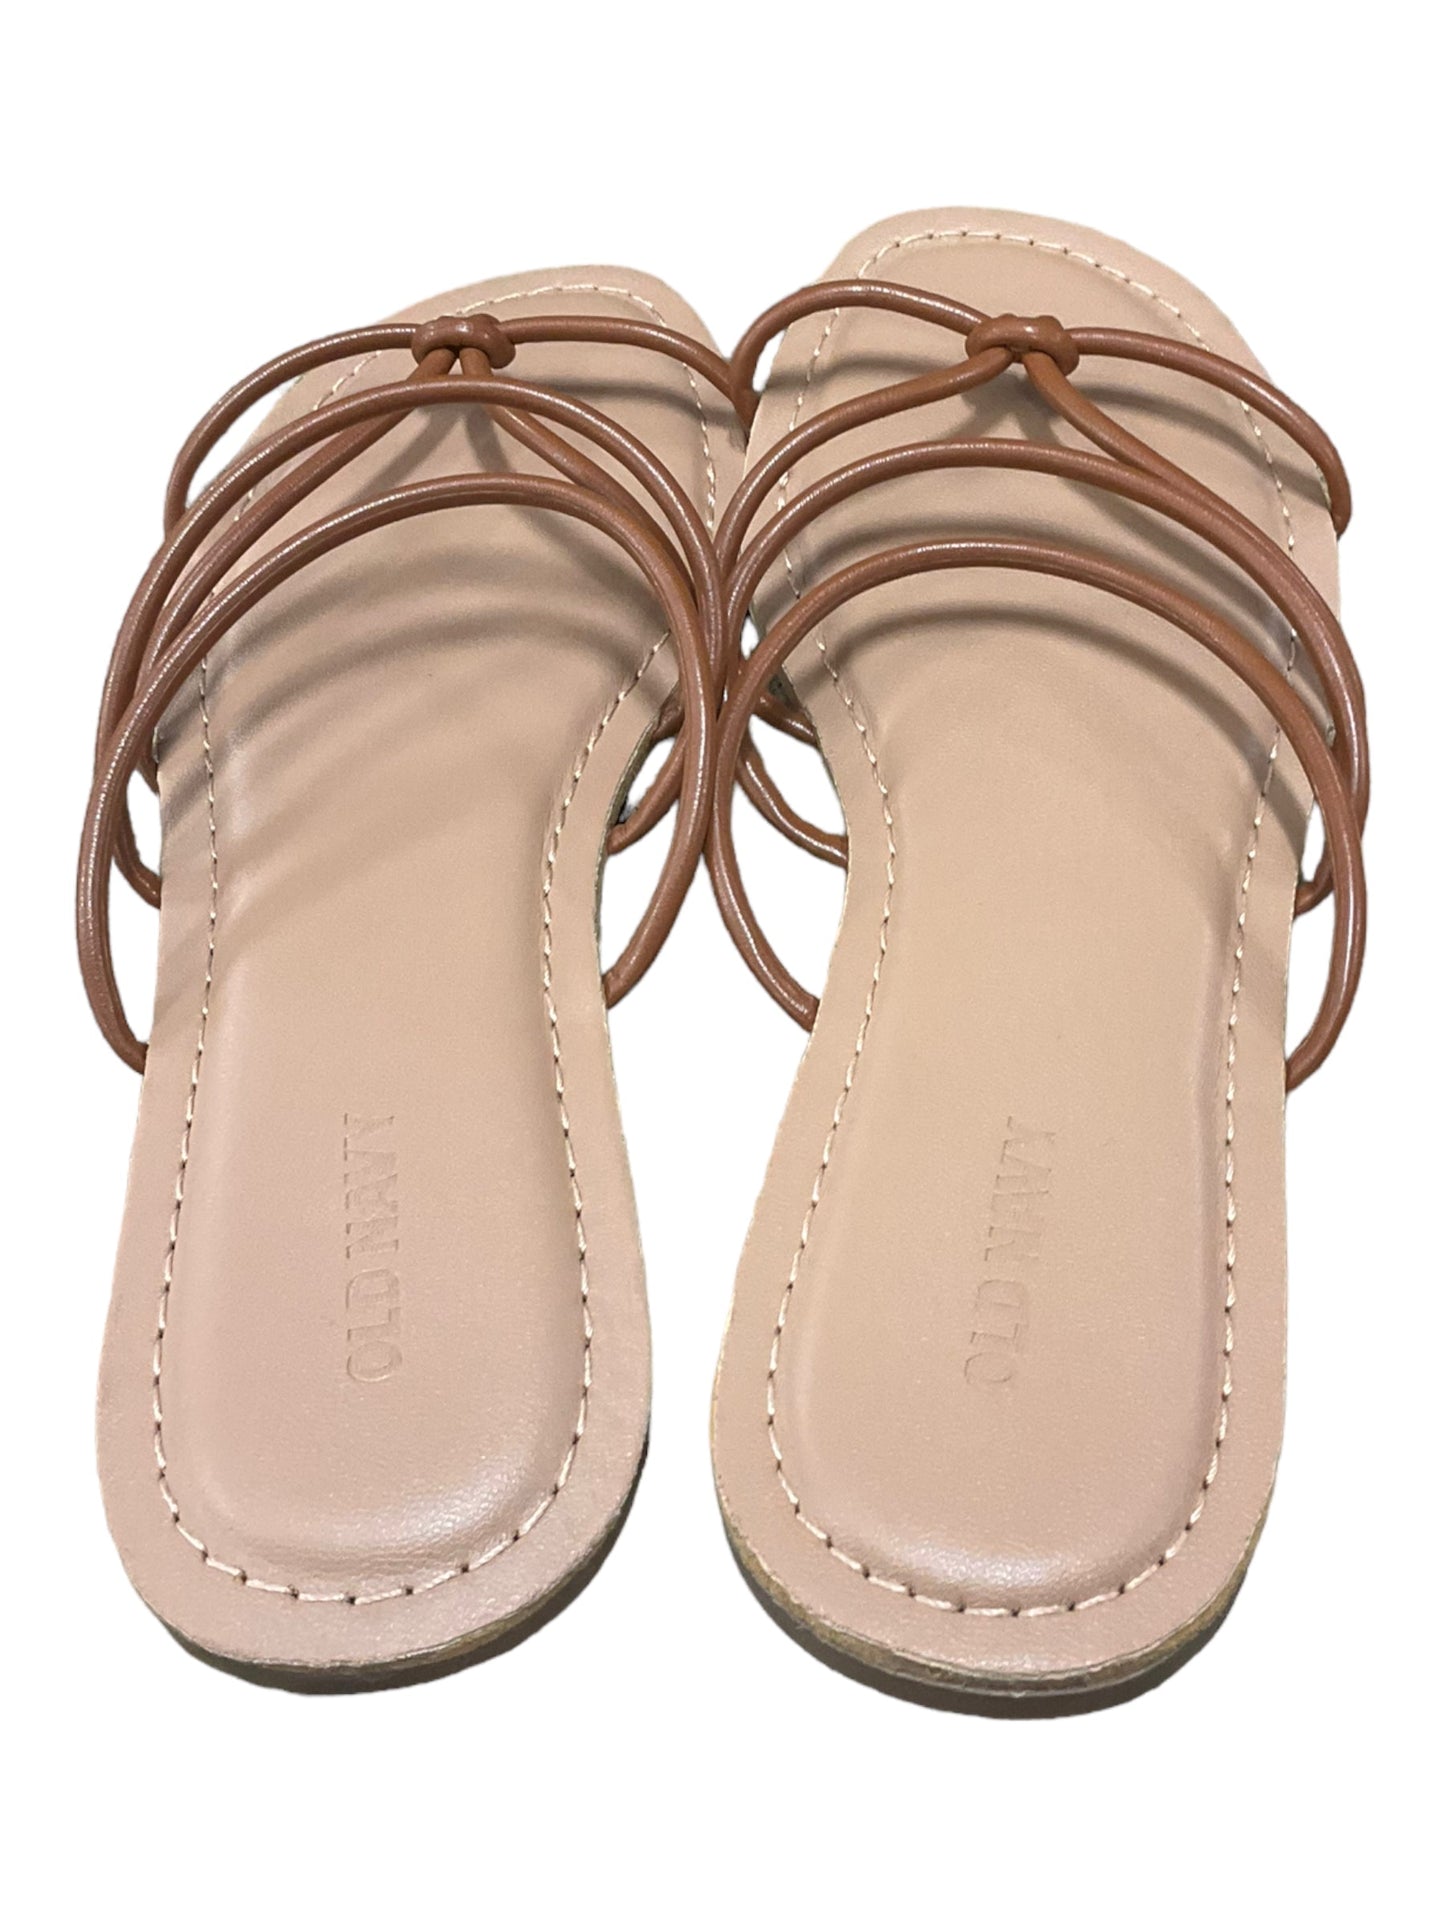 Sandals Flats By Old Navy  Size: 8